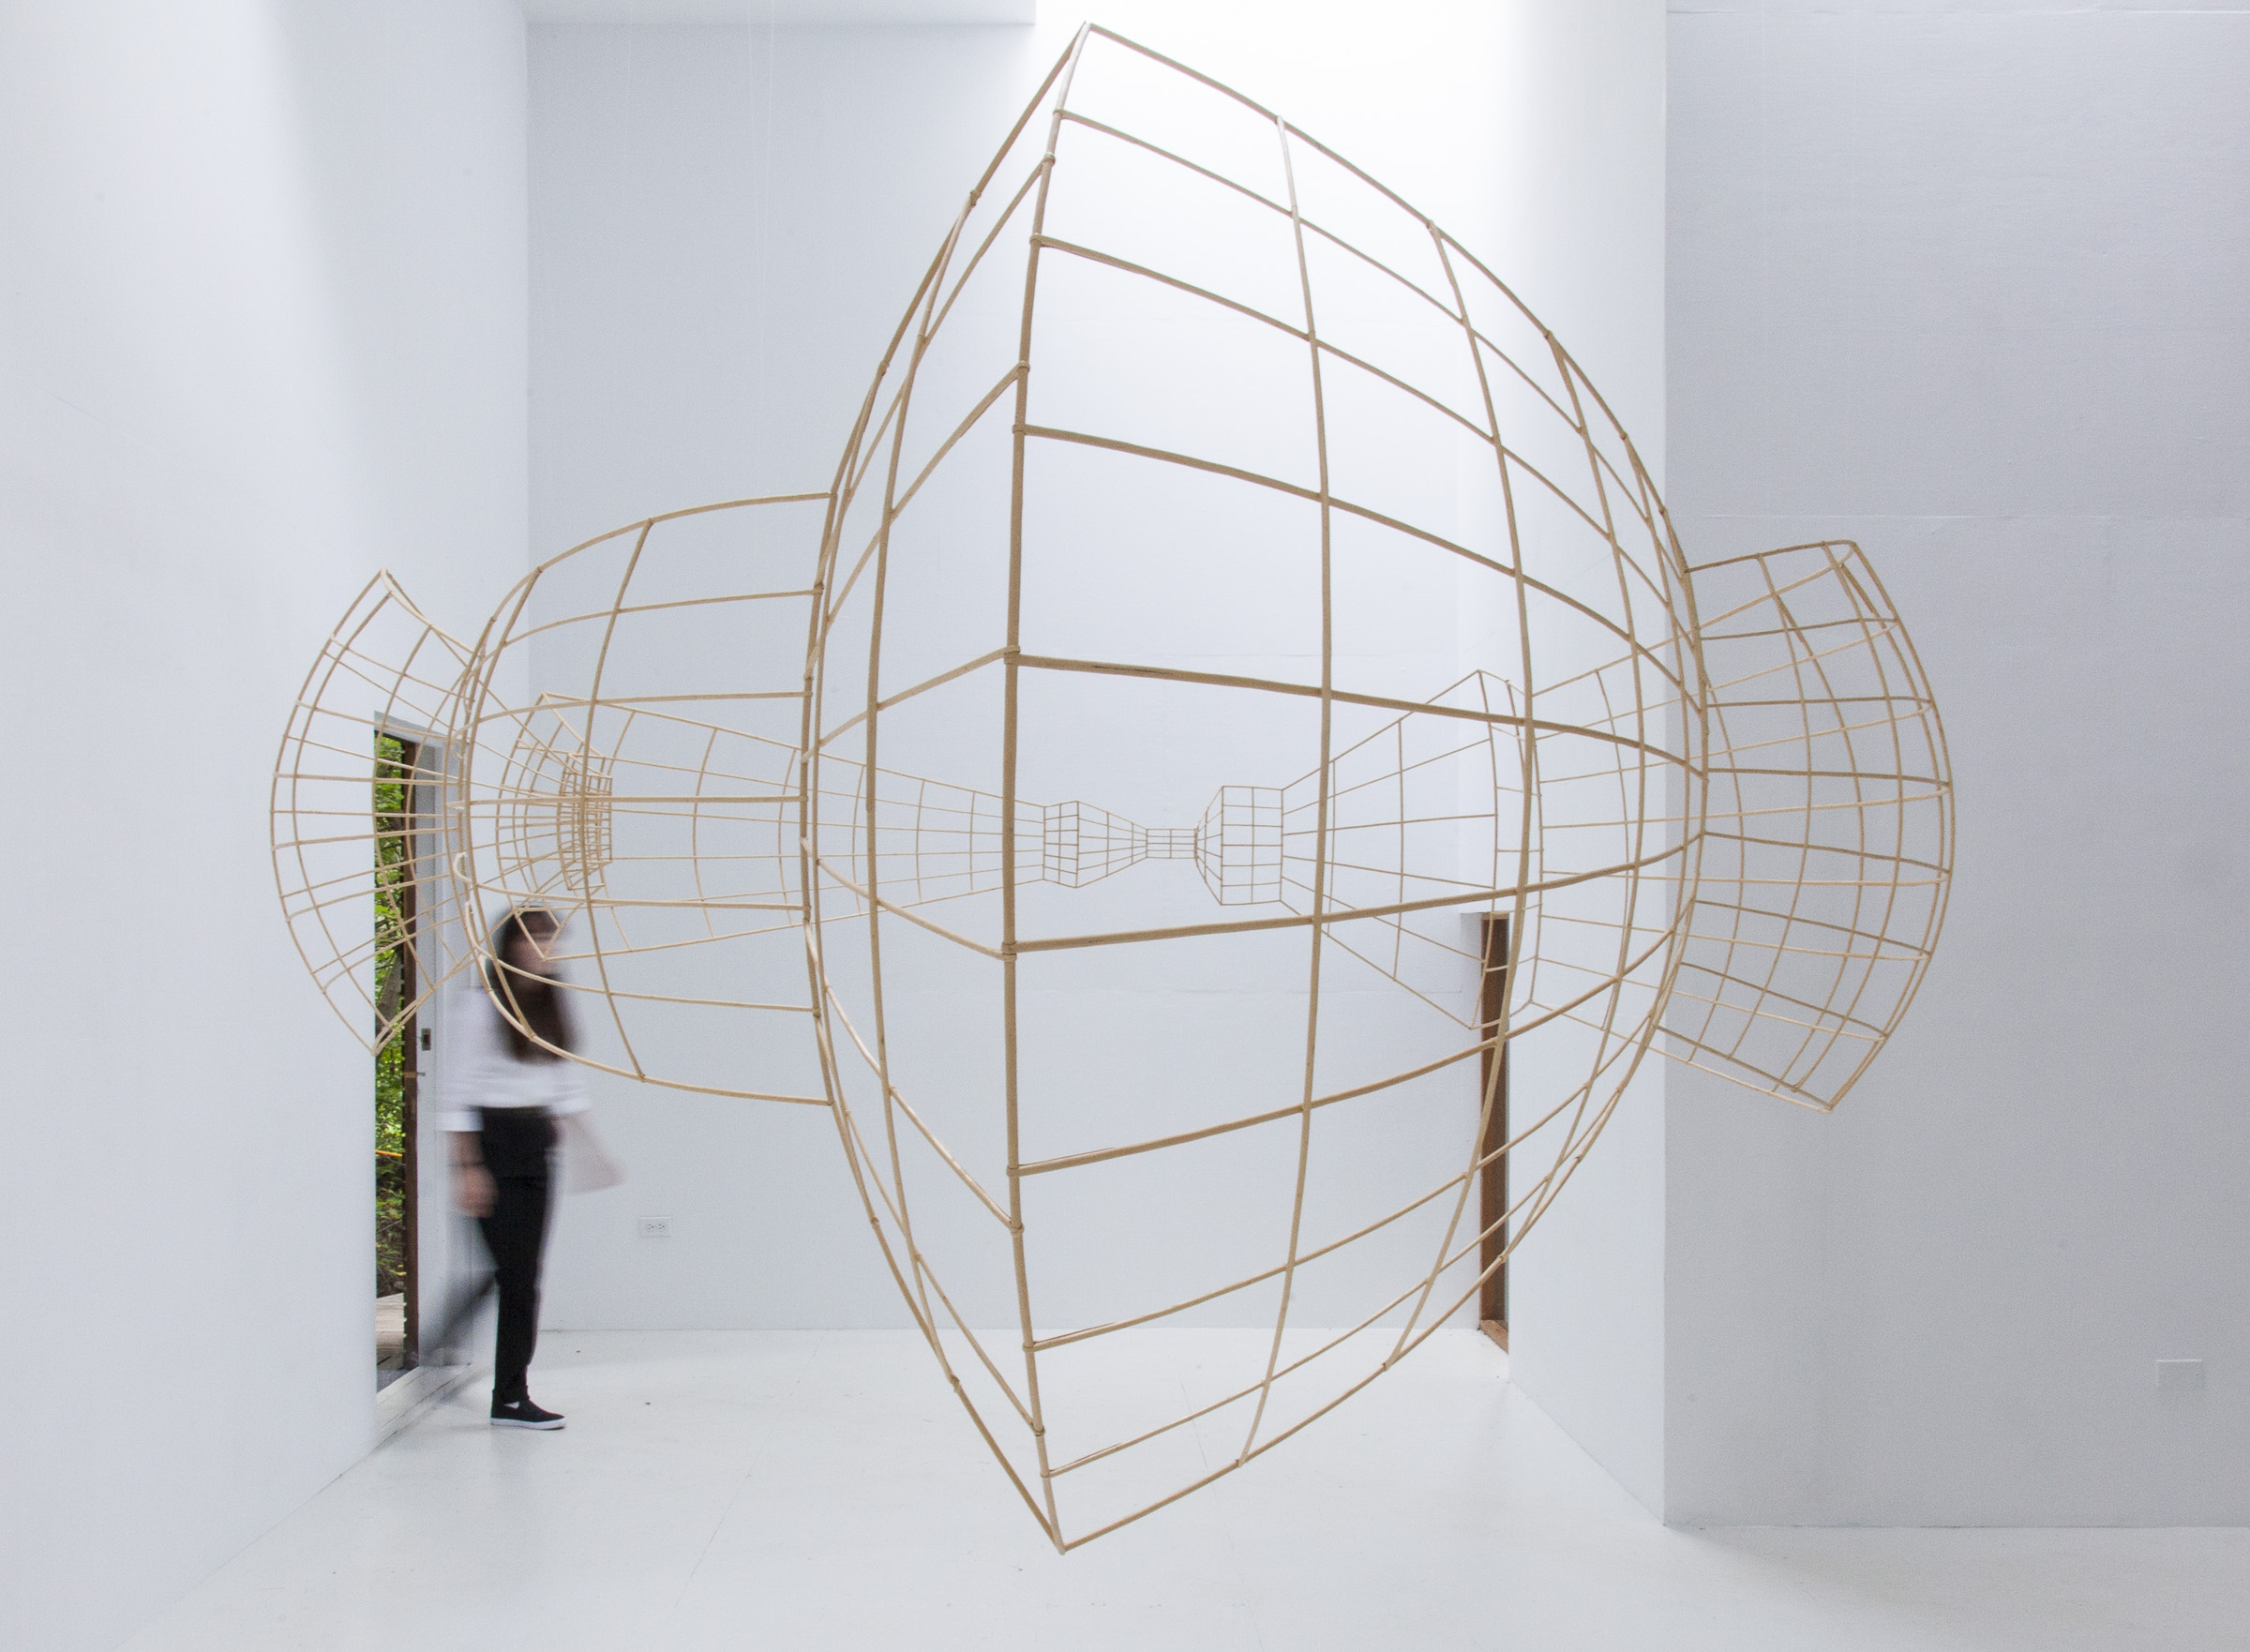 Ricci Albenda’s Open Universe fluctuates between the fields of sculpture and architecture. Through the use of vanishing points sculpted with bent willow, Open Universe is illusion in space.